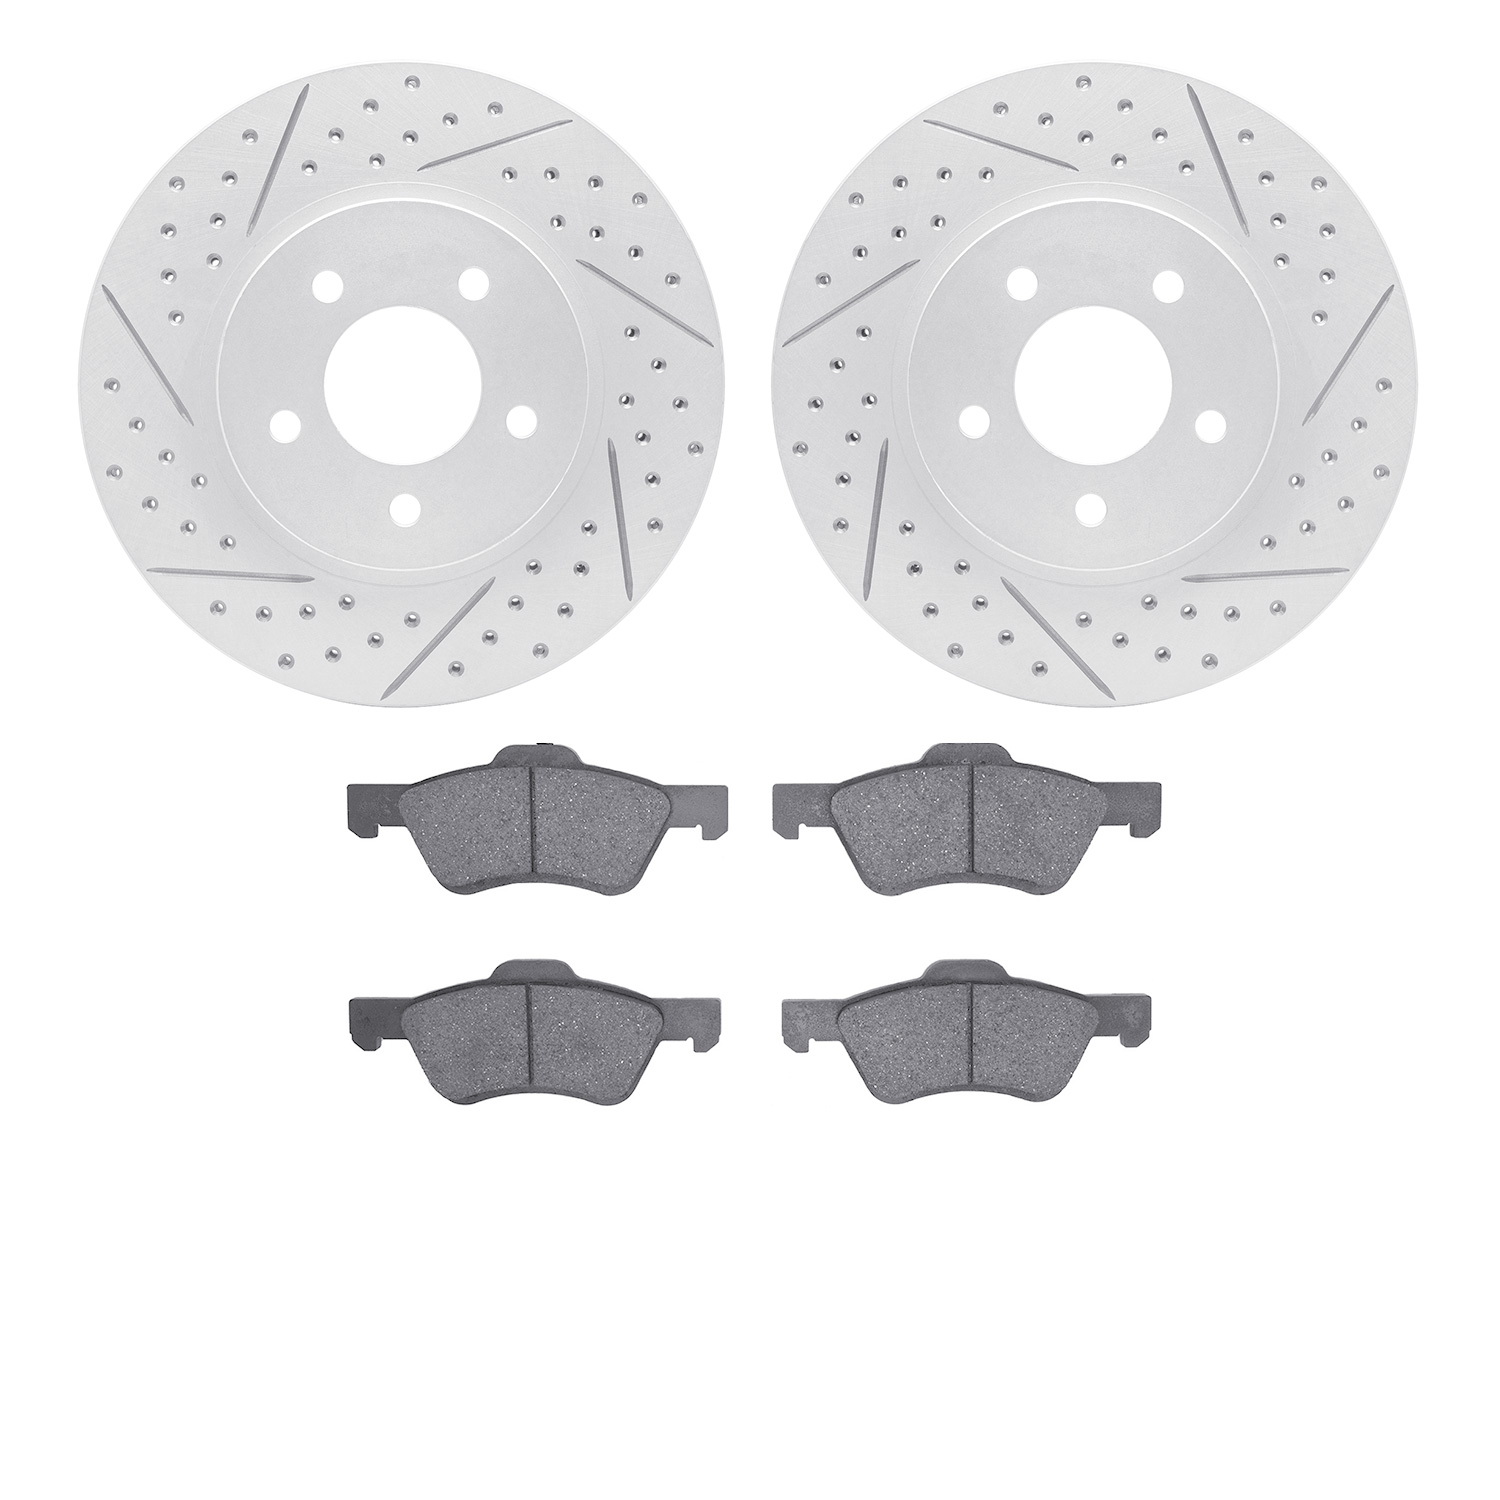 2502-54169 Geoperformance Drilled/Slotted Rotors w/5000 Advanced Brake Pads Kit, 2005-2012 Ford/Lincoln/Mercury/Mazda, Position: